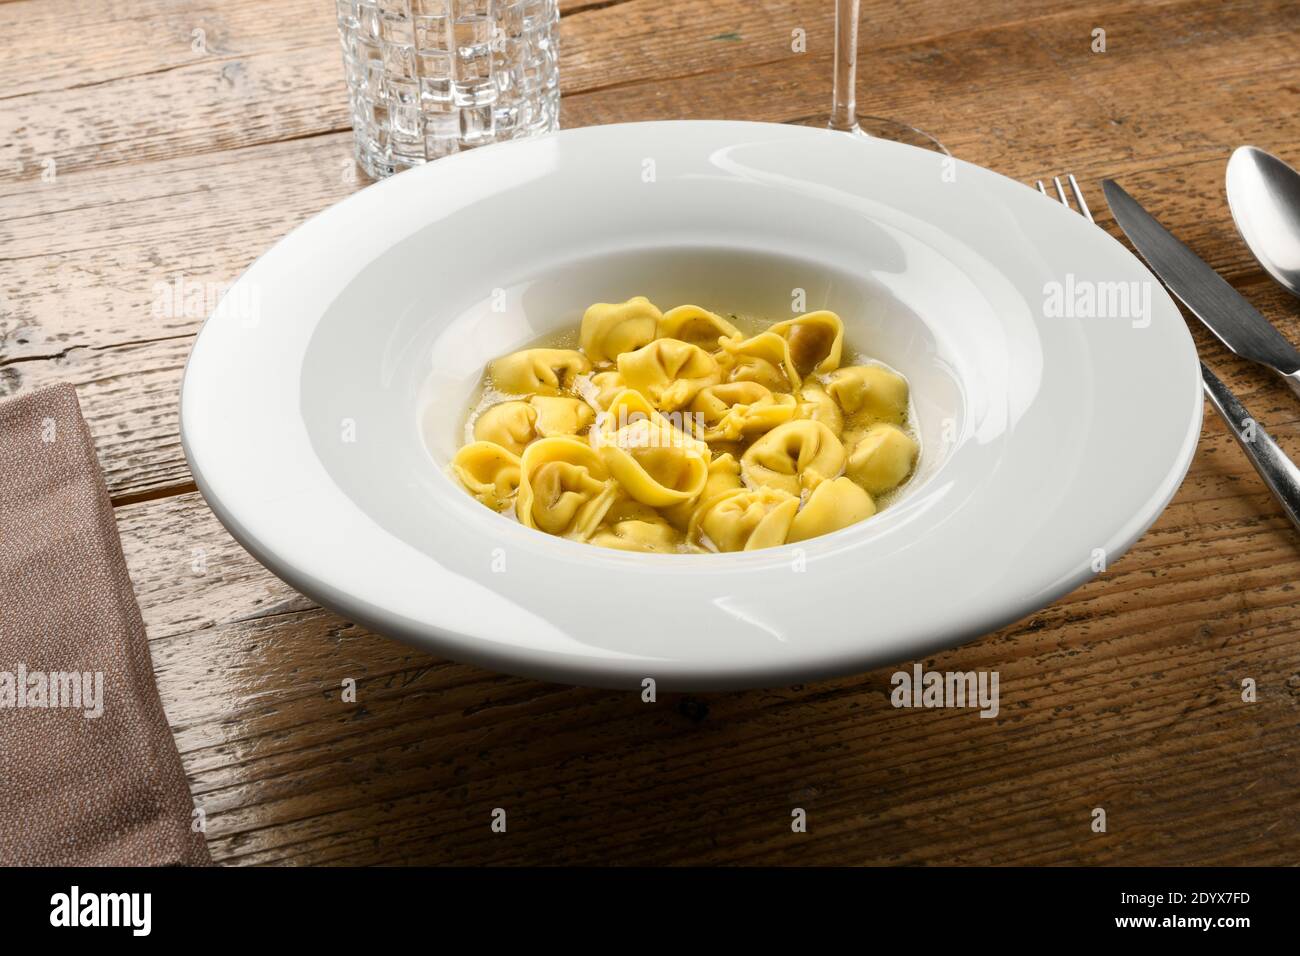 Bowl of tortellini or cappelletti pasta in broth from the Emilia Romagna region of Italy served in a stylish white dish at table Stock Photo